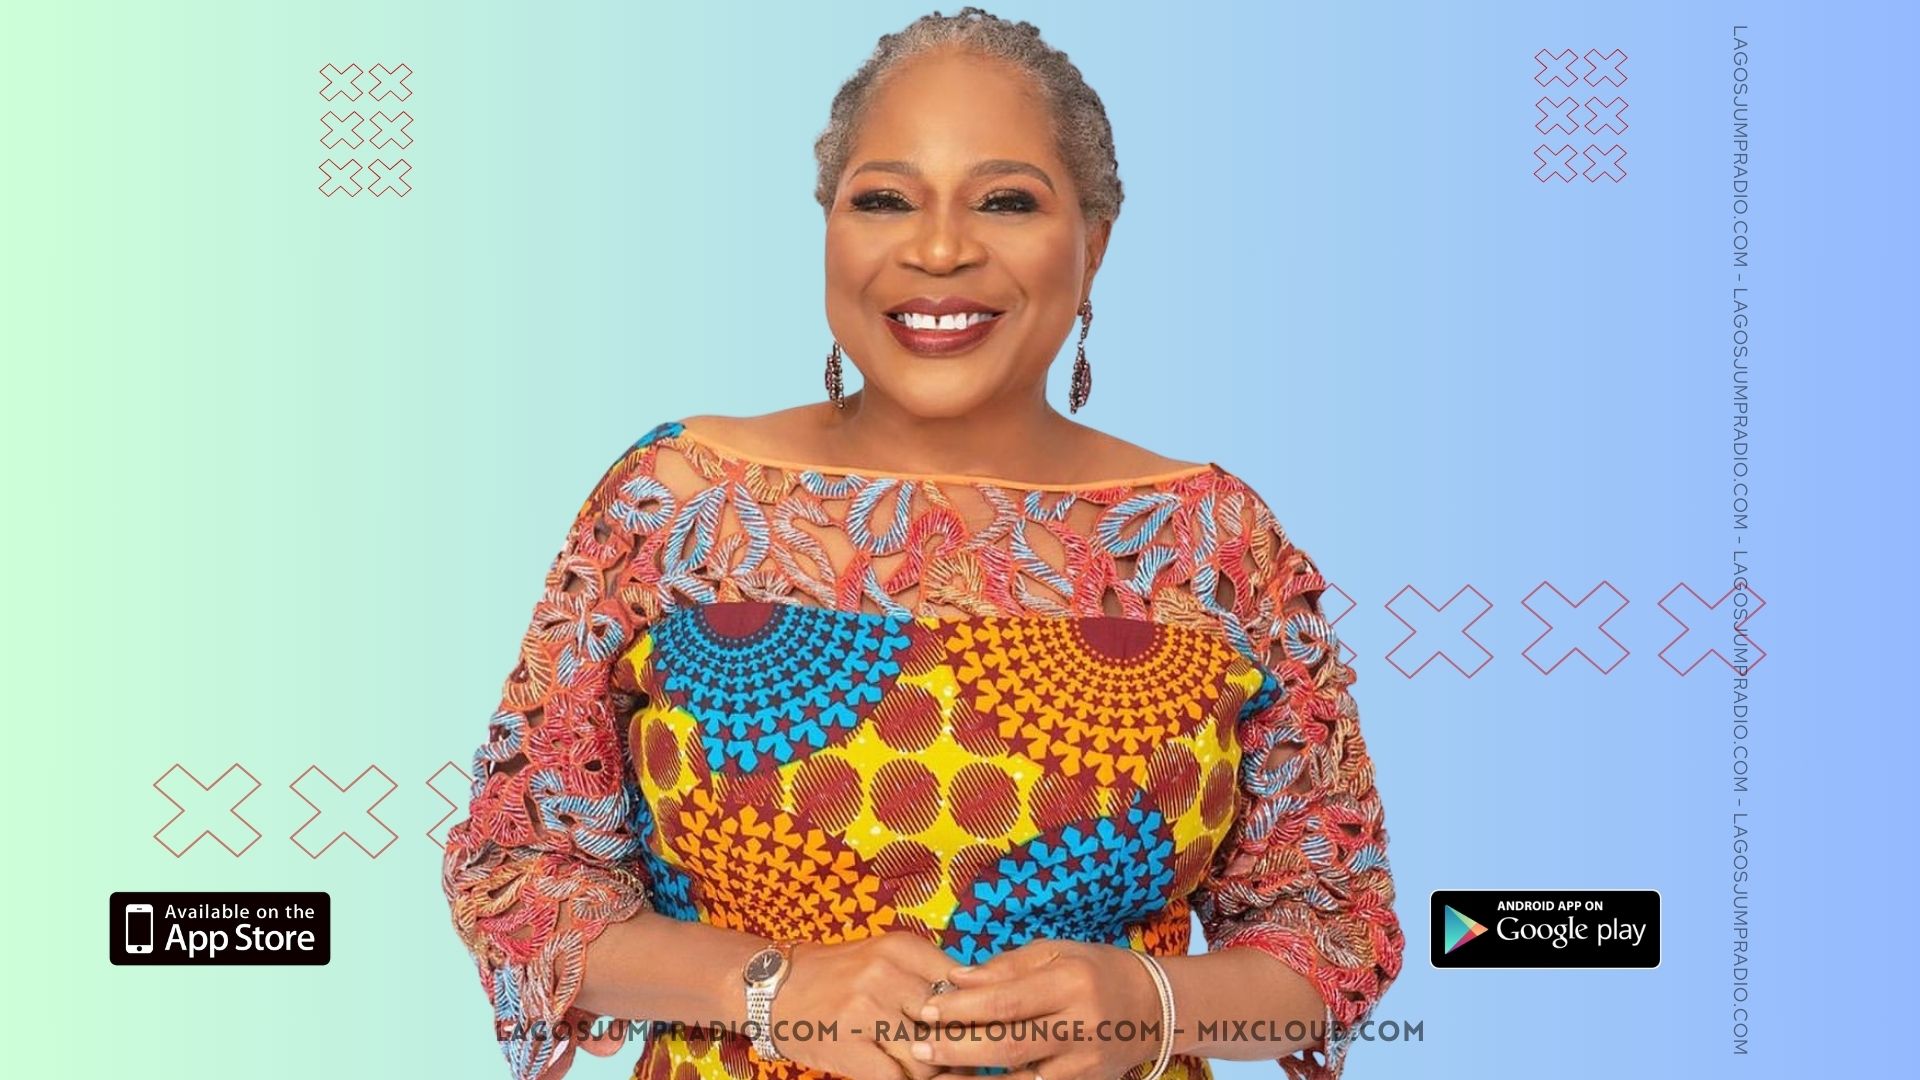 Onyeka Onwenu is a name synonymous with Nigerian excellence. A singer, songwriter, actress, activist, and politician, her impact transcends mere artistic expression.